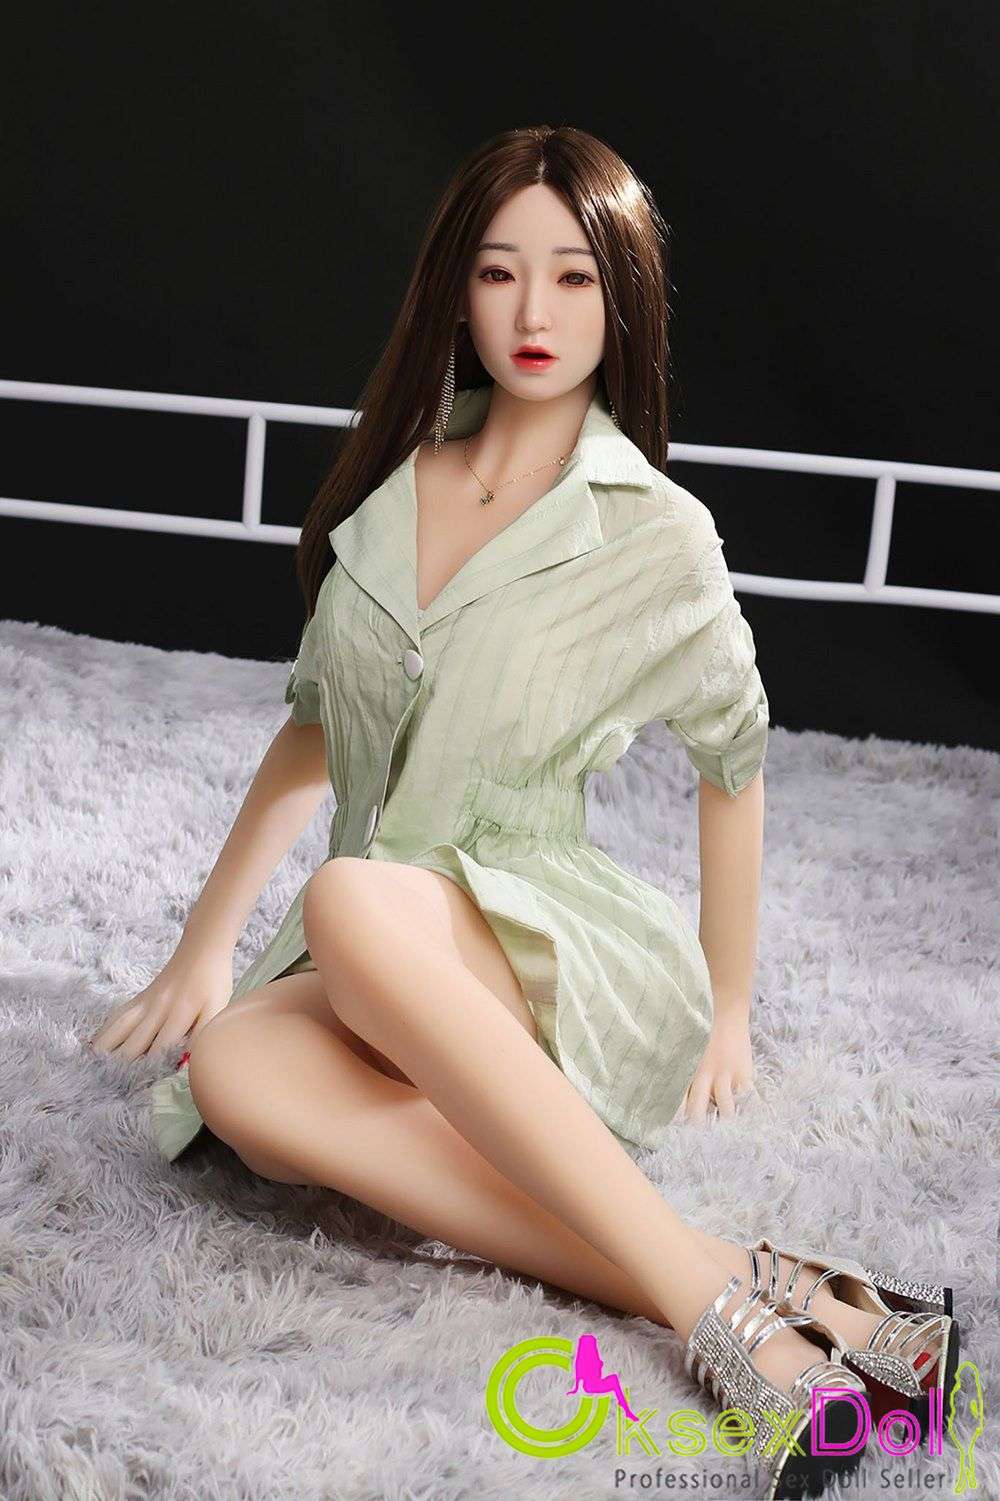 Huge Tits TPE Silicone Doll Photos